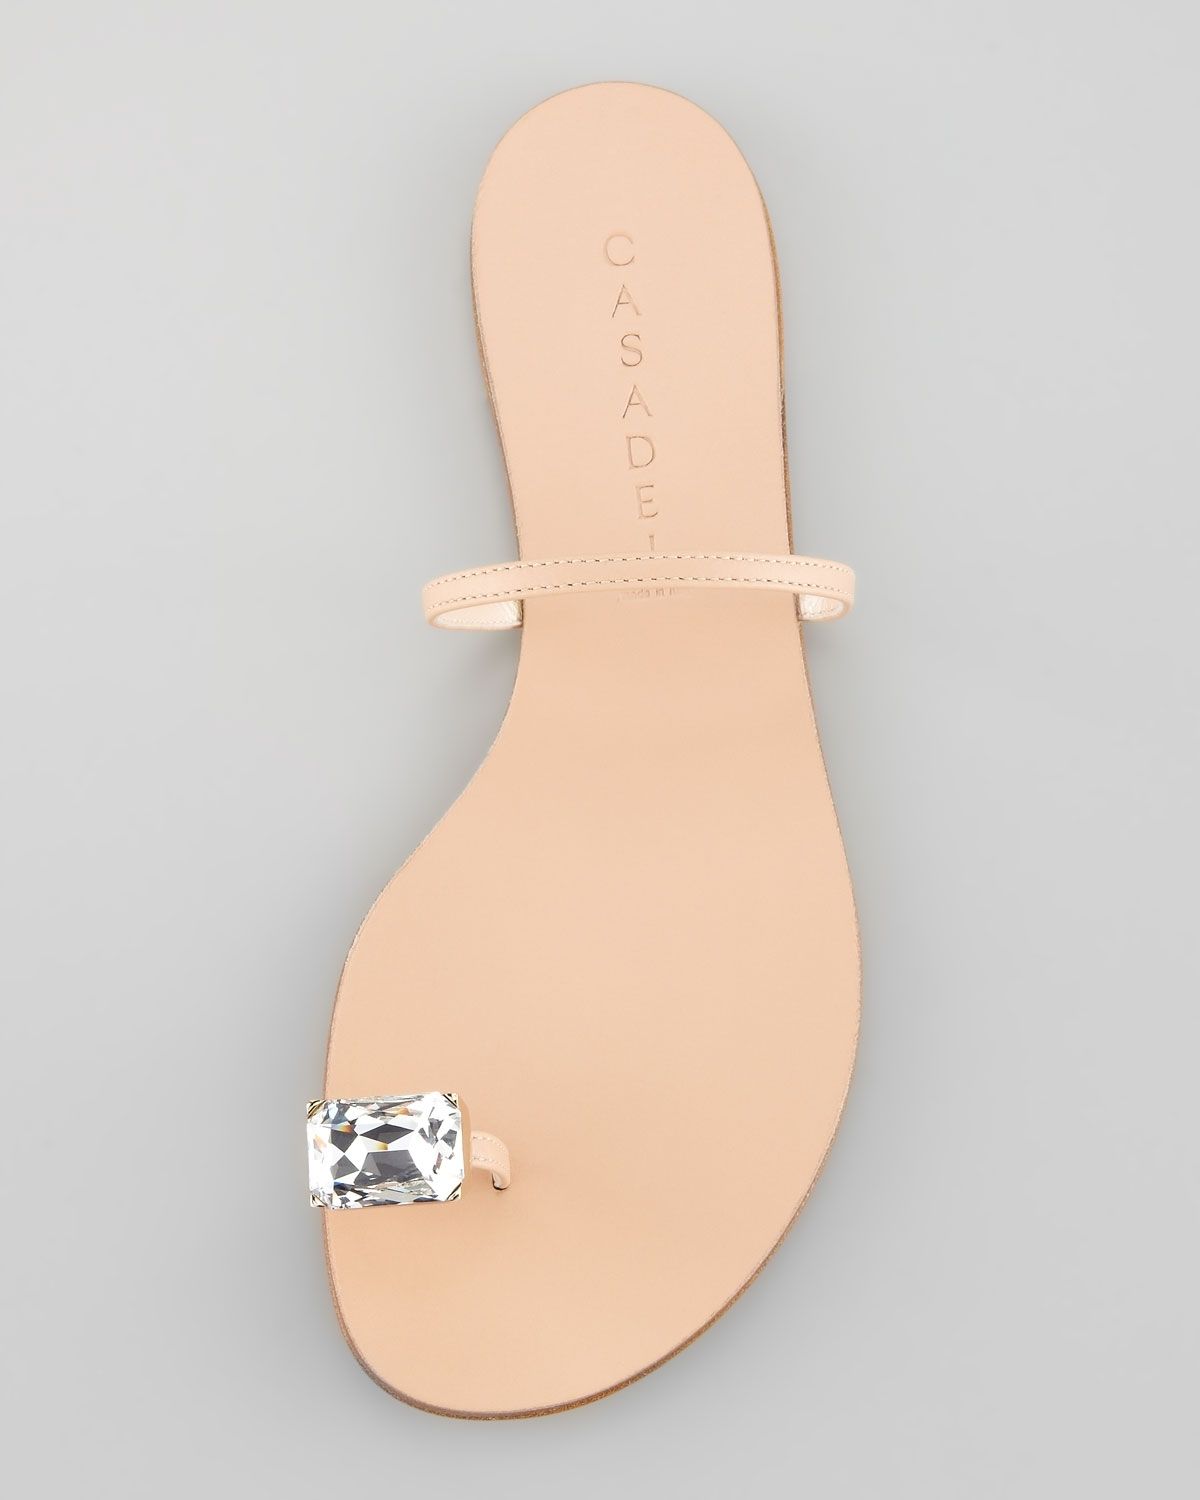 Lyst – Casadei Flat Crystal Toering Sandal In Natural Regarding Most Recently Released Crystal Toe Rings (View 5 of 15)